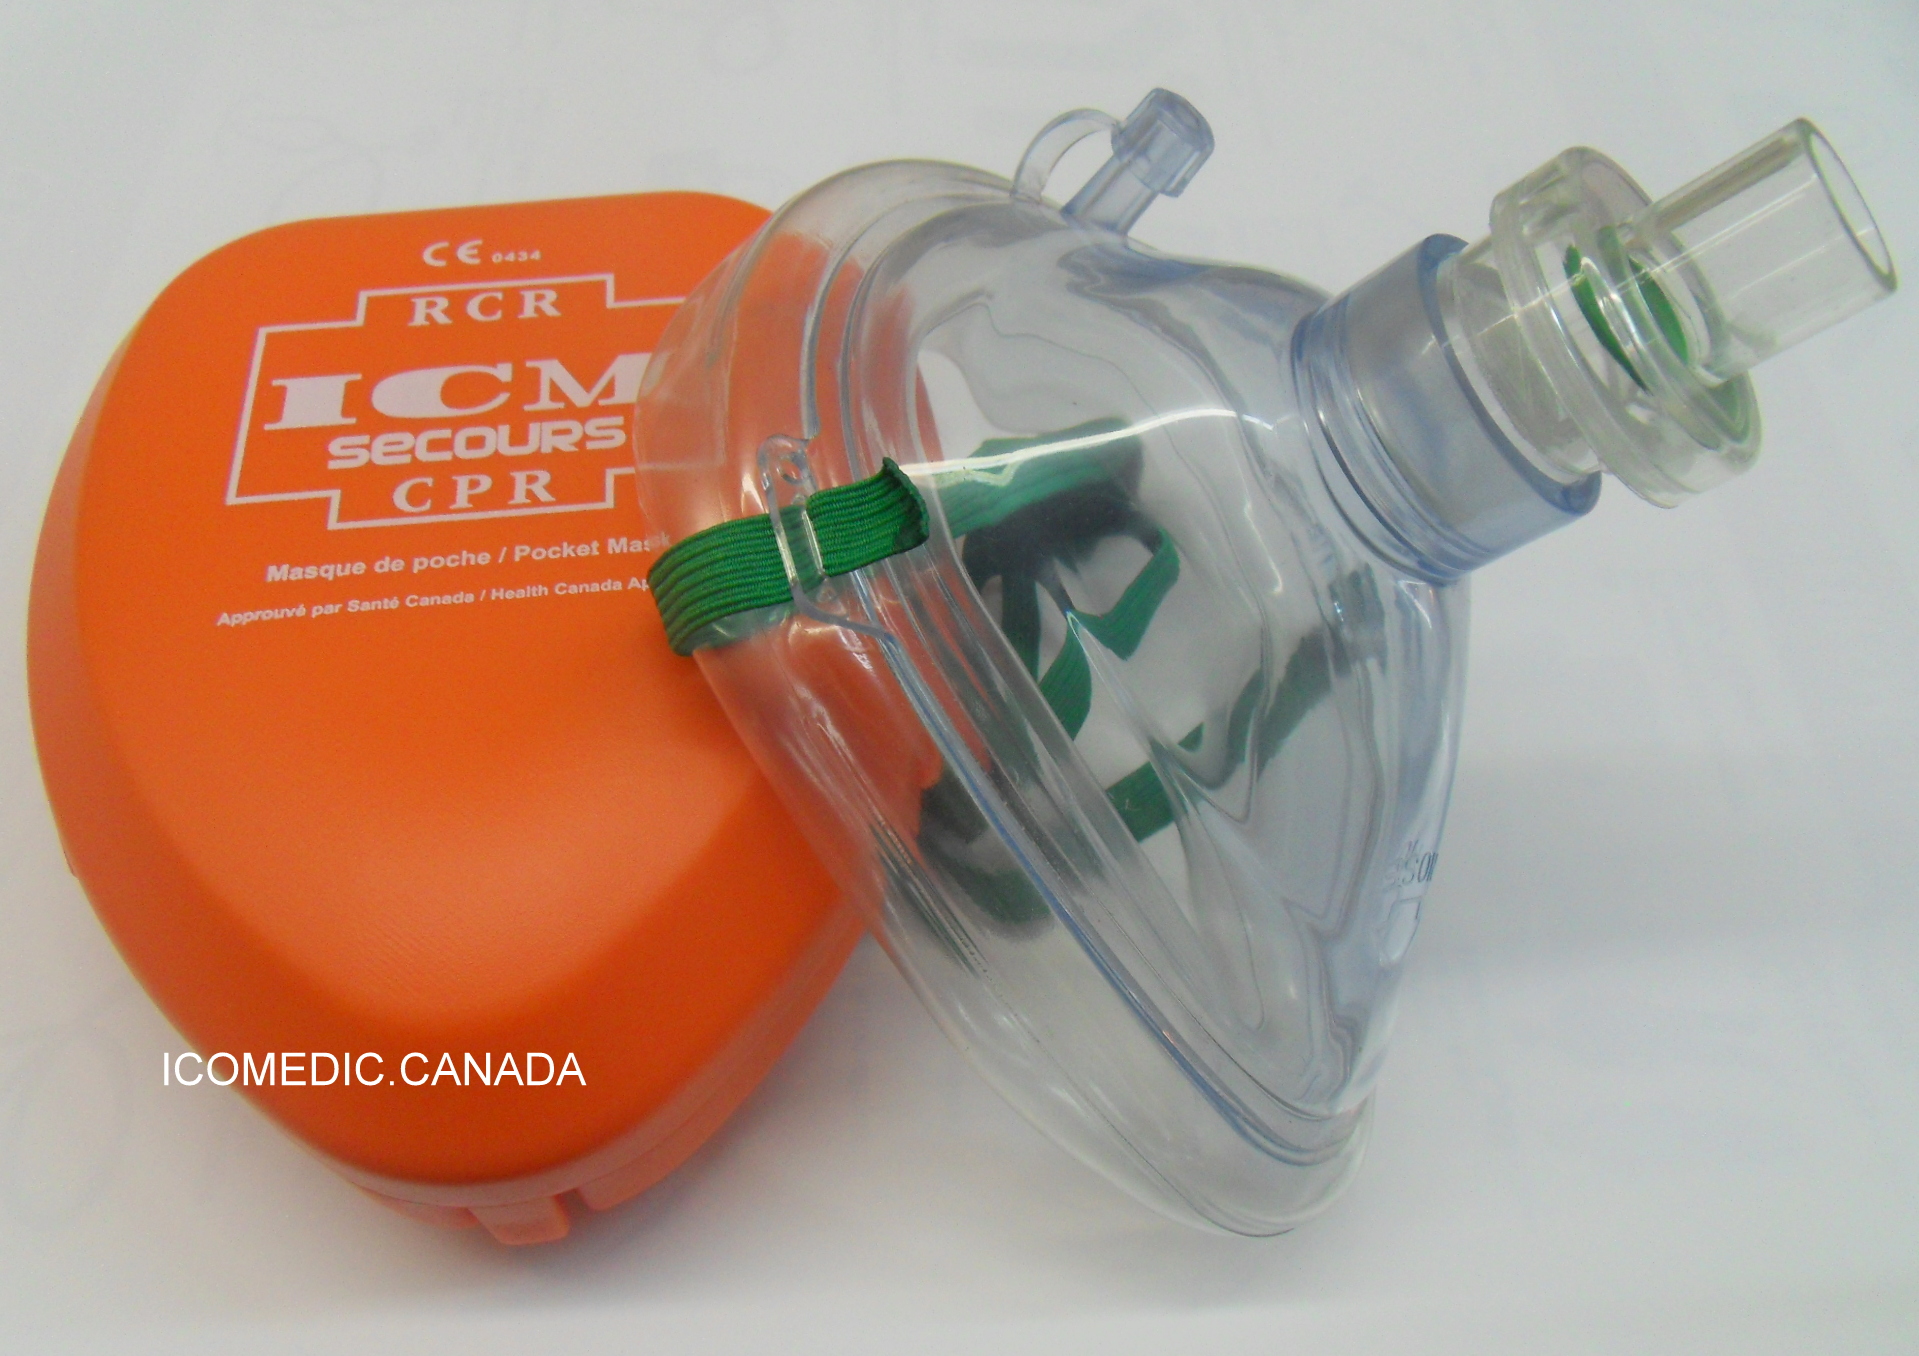 CPR Pocket Mask ICM Secours